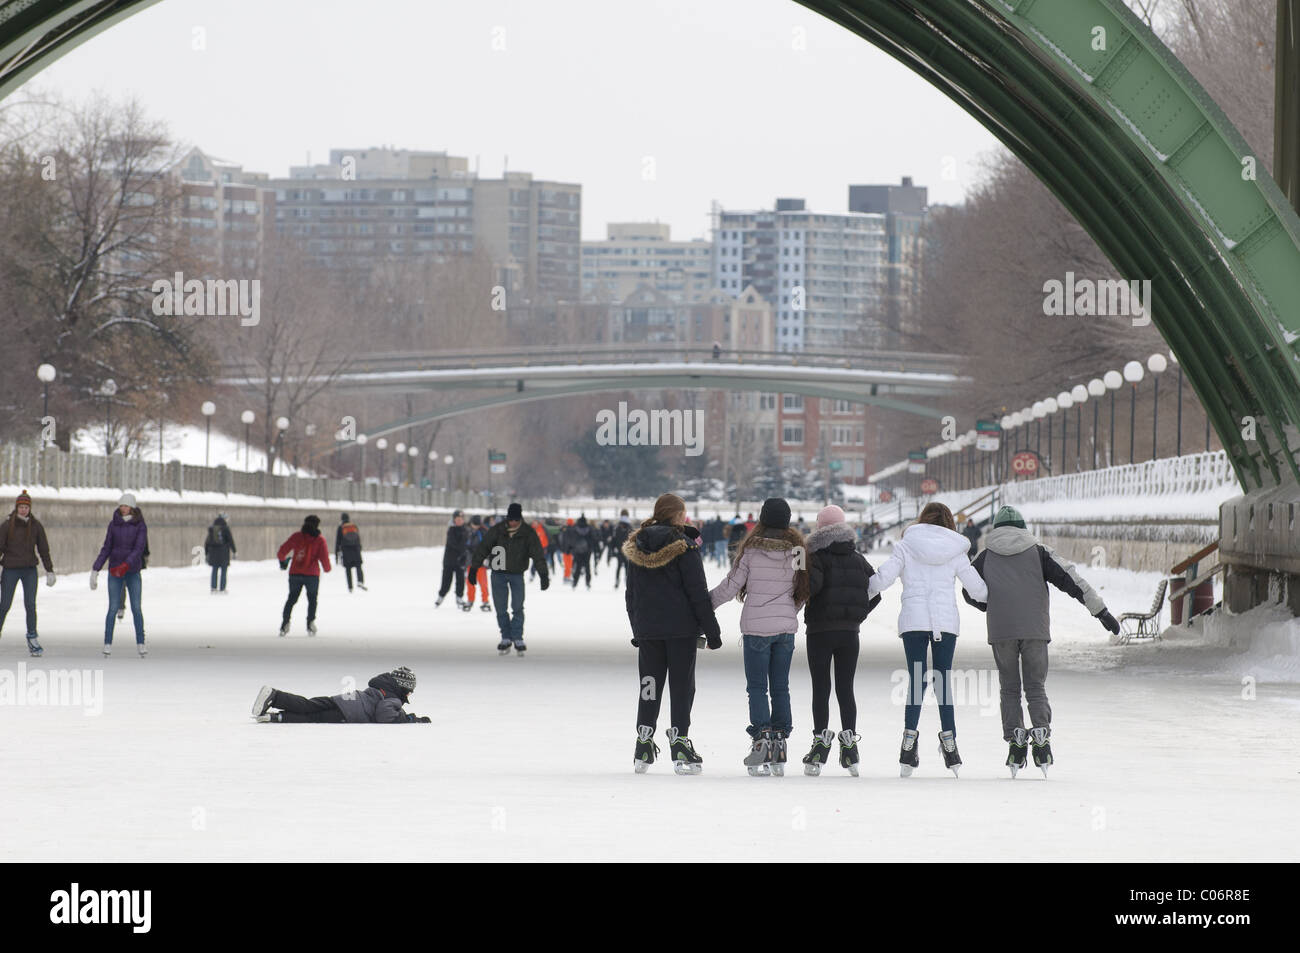 Members of the public take to the ice on the Rideau Canal during the first day of Winterlude on Feb. 4th 2011 in Ottawa, Canada. Stock Photo